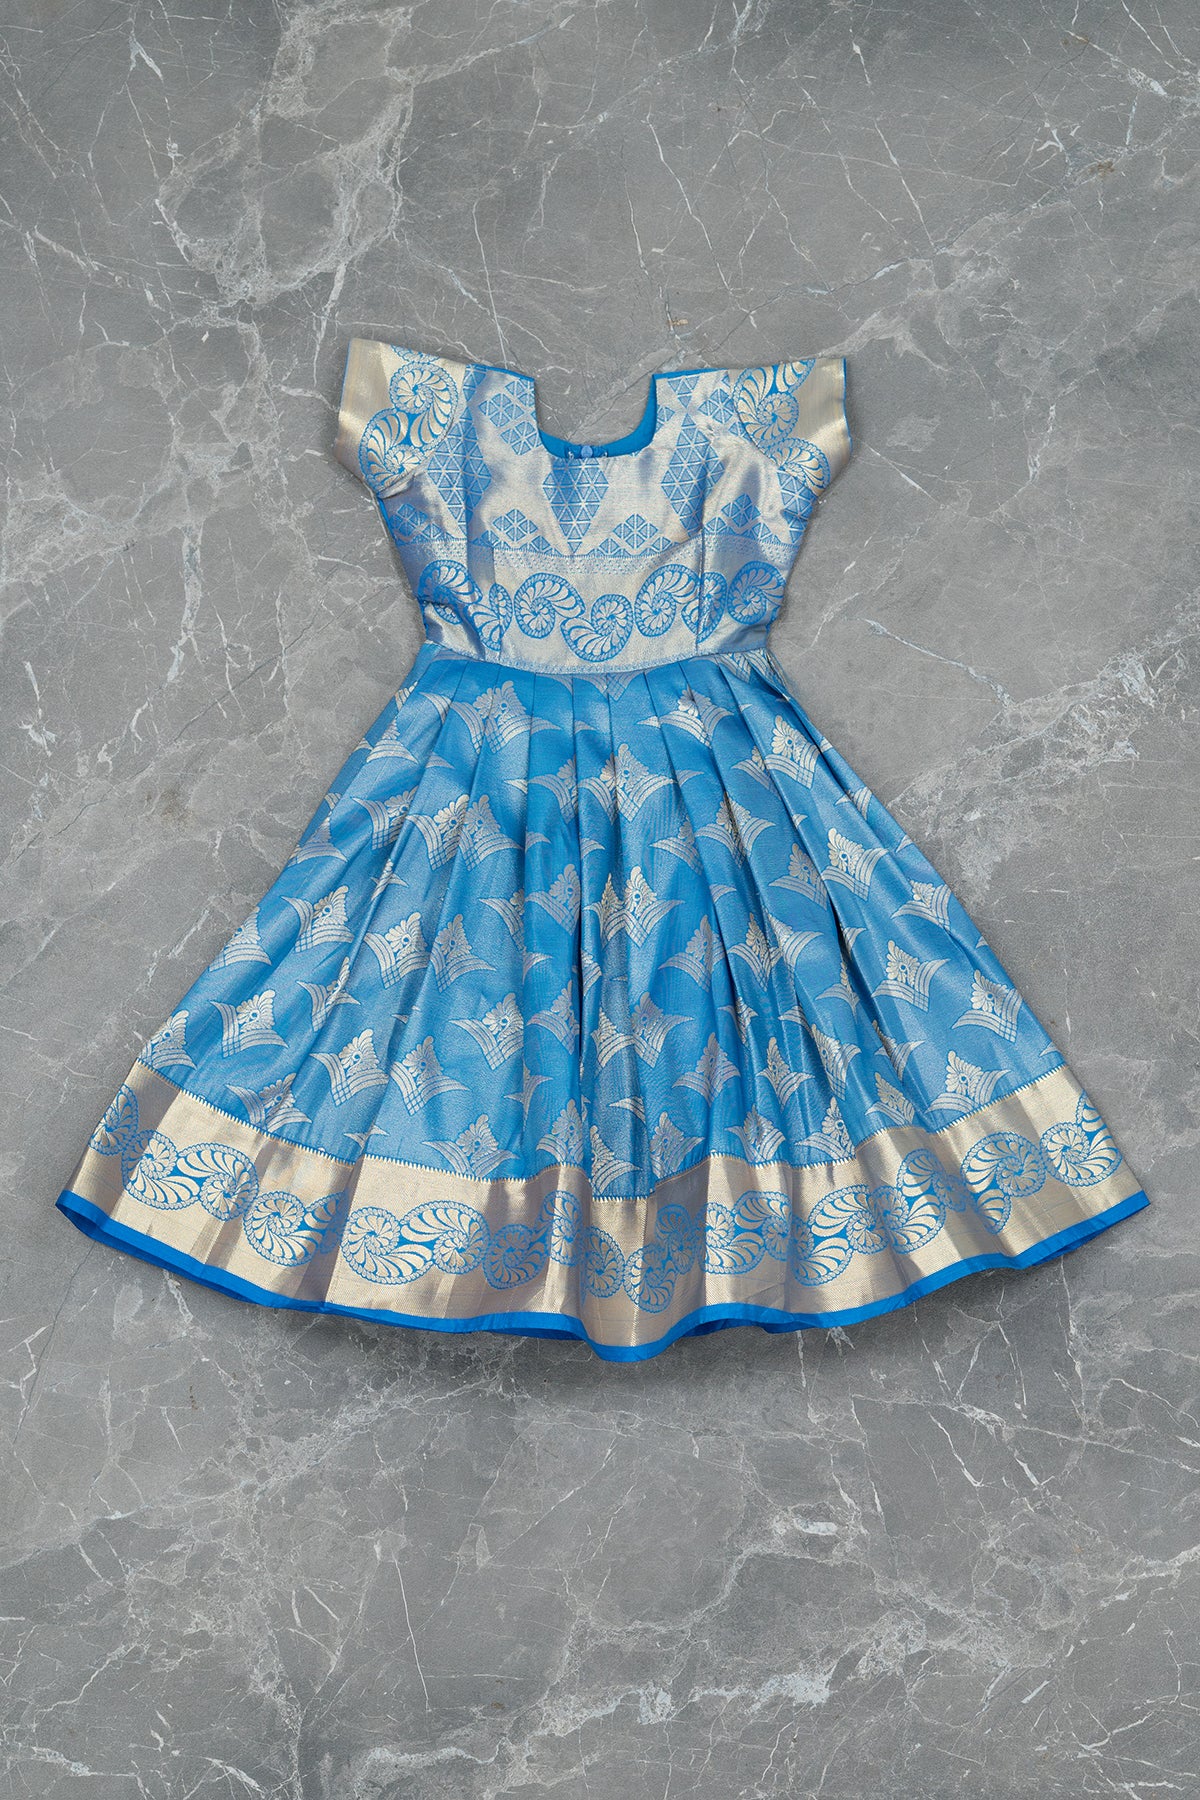 Stunning A Line Royal Blue Childrens Dress With Lace Tulle, Ankle Length,  Tiered Bow, Beads, Sequins Appliques Perfect For Weddings, First Communion,  And Birthdays From Weddingpalacedress, $81.36 | DHgate.Com